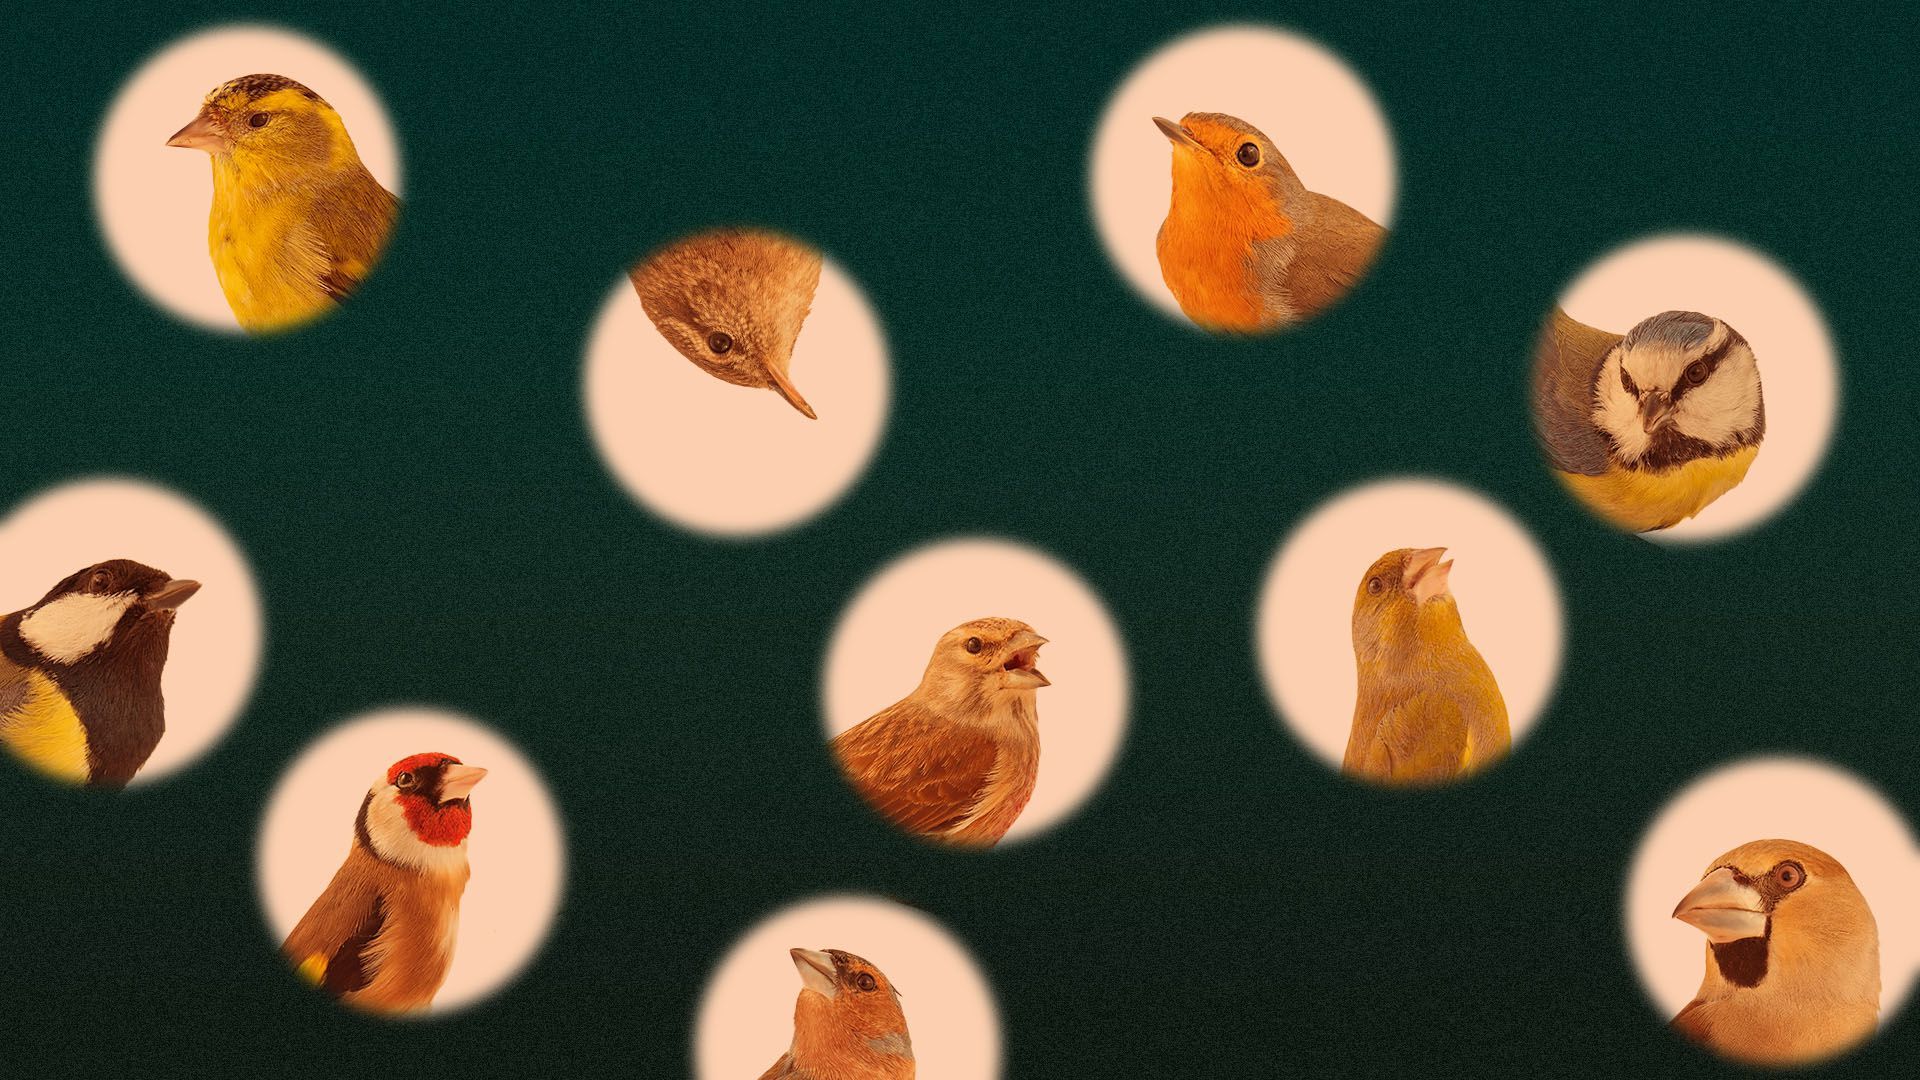 Illustration of a birds peeking through viewfinder holes in a green landscape